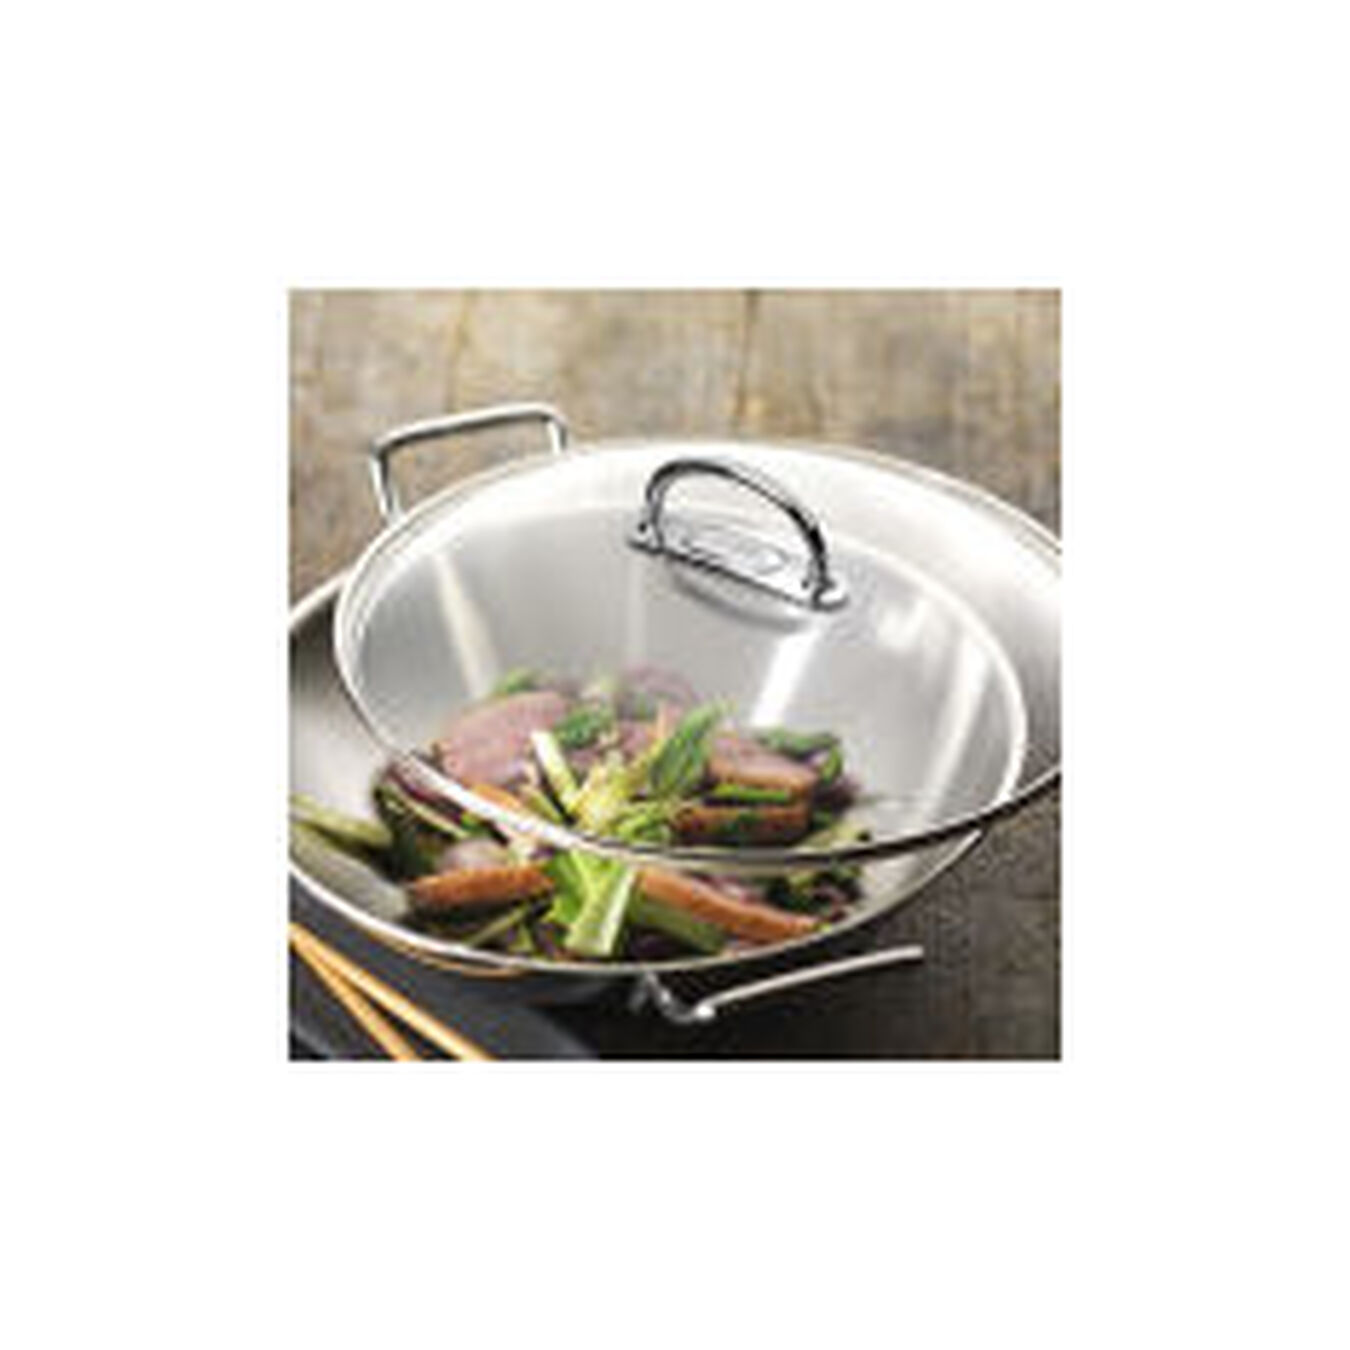 36 cm / 14 inch 18/10 Stainless Steel Wok,,large 2